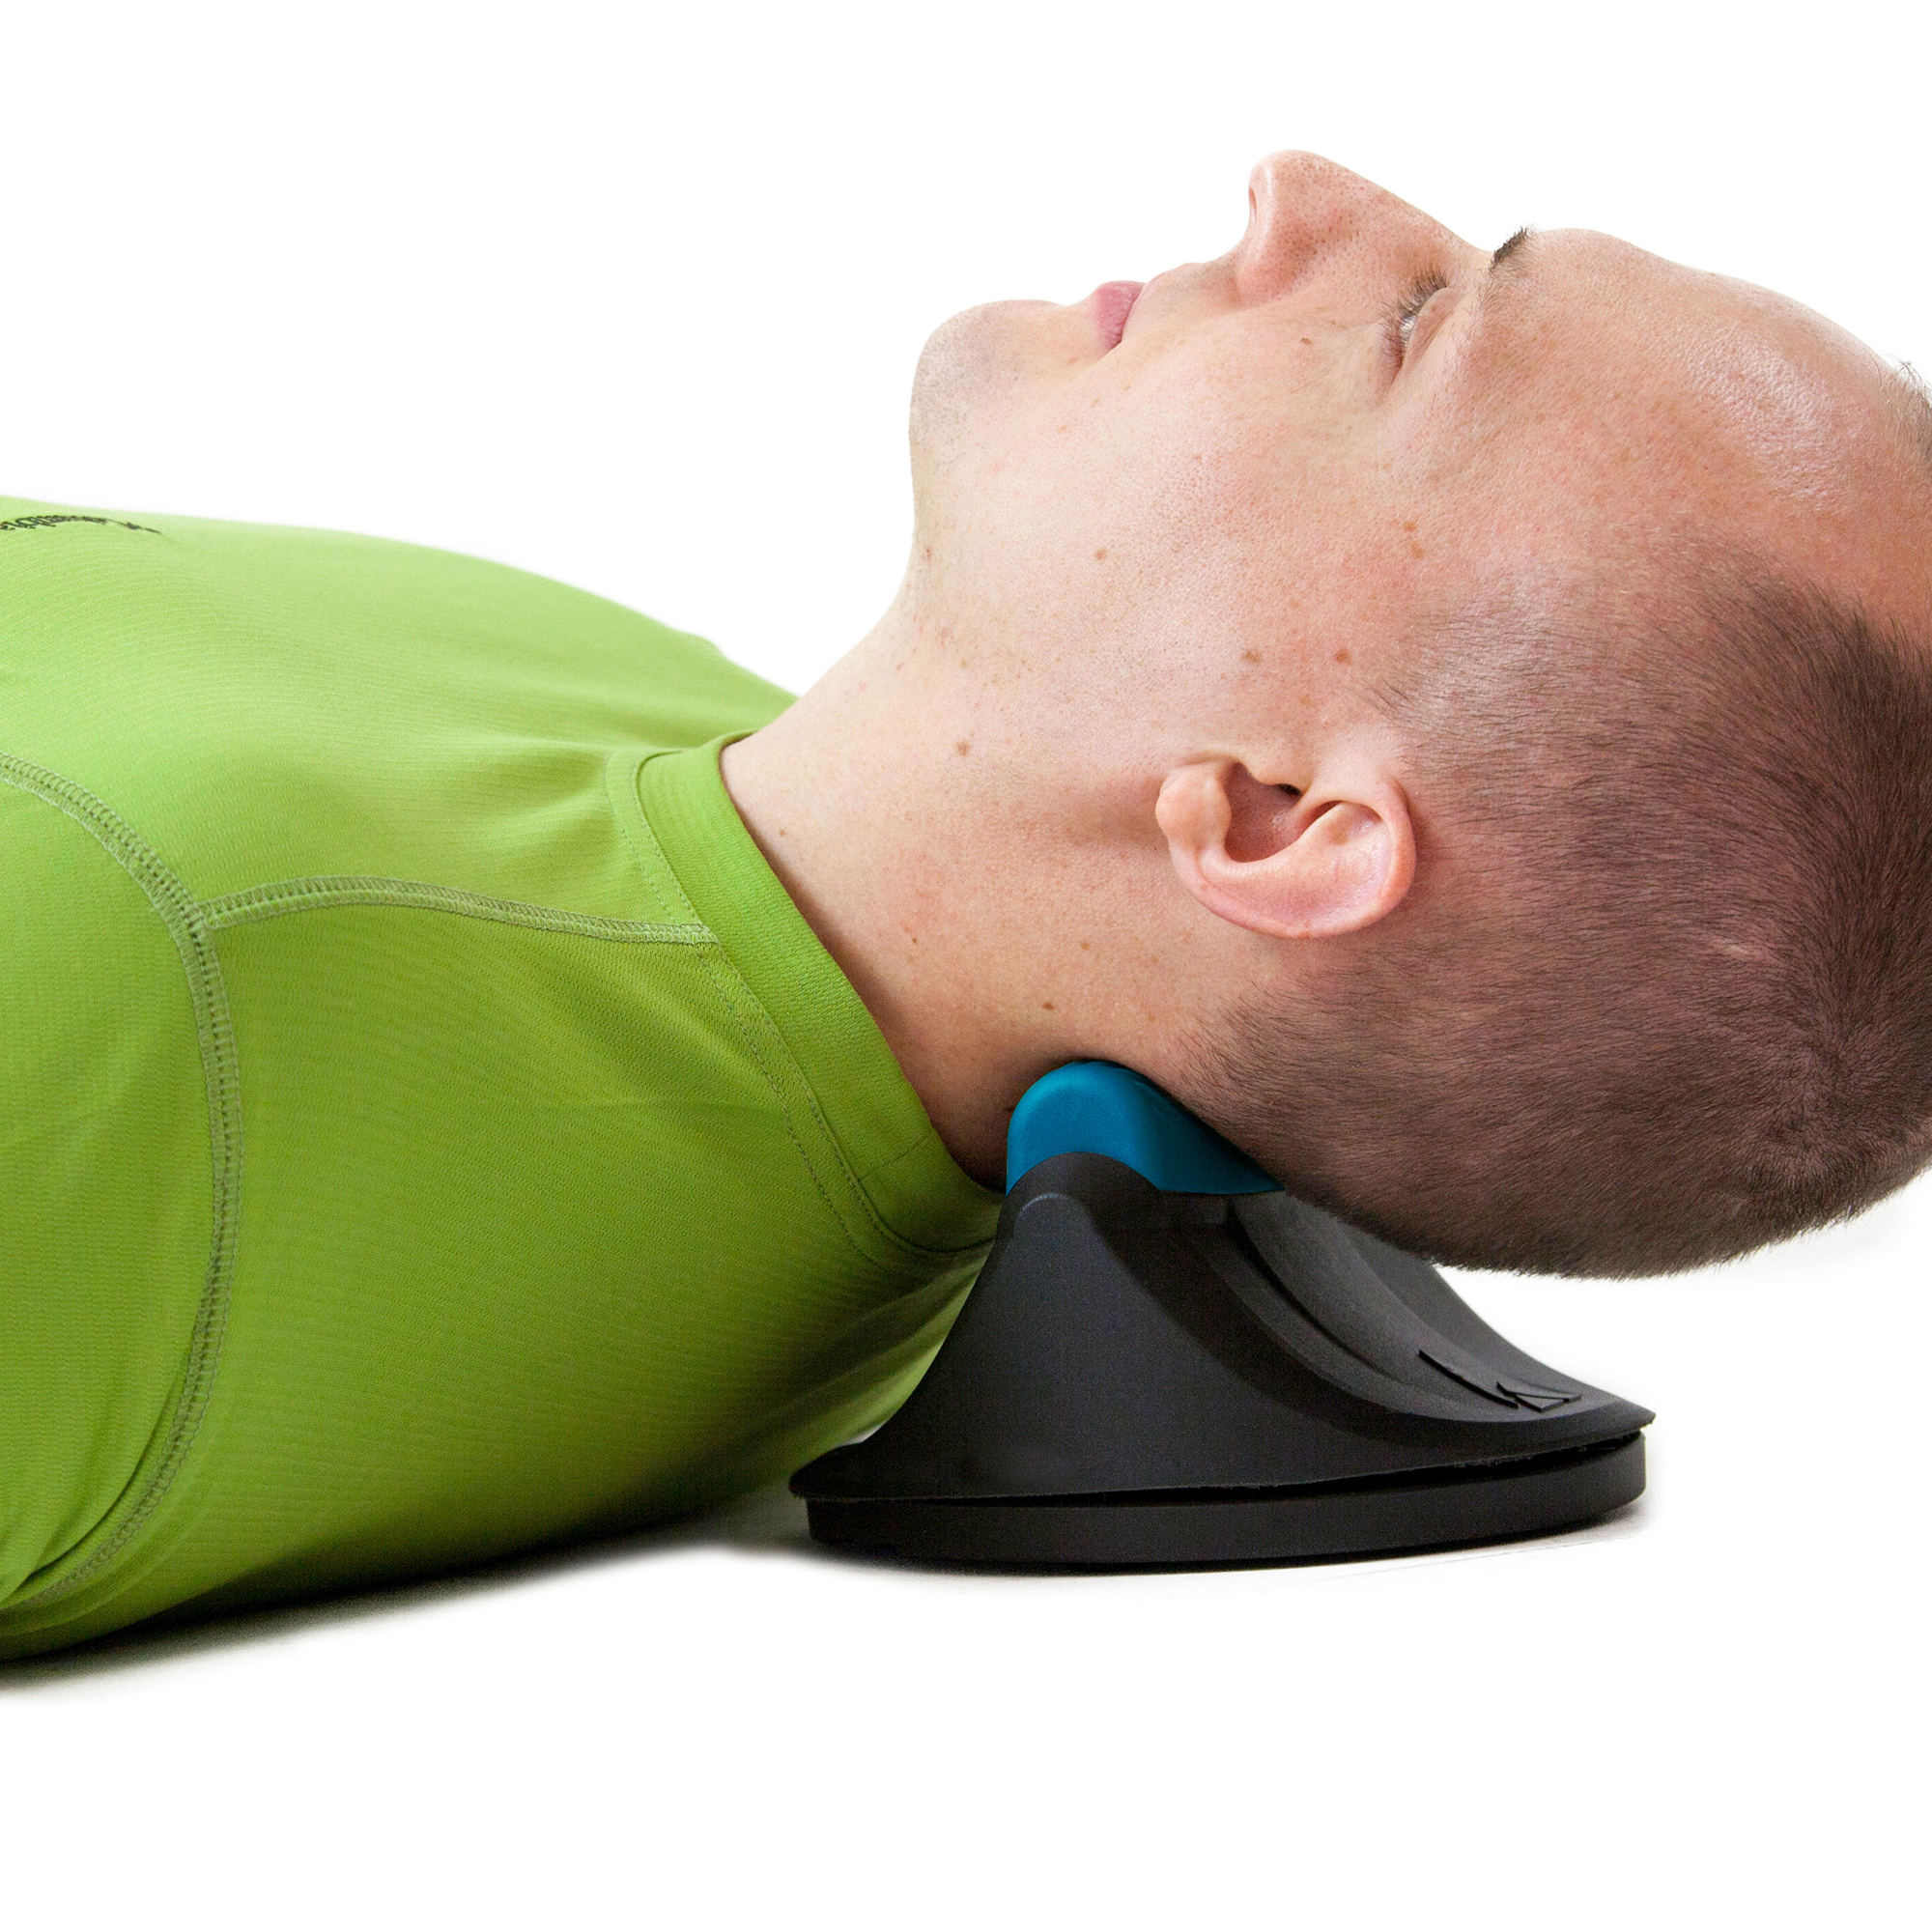 Neck Relax - The Best Neck Pain Treatment Choice For You